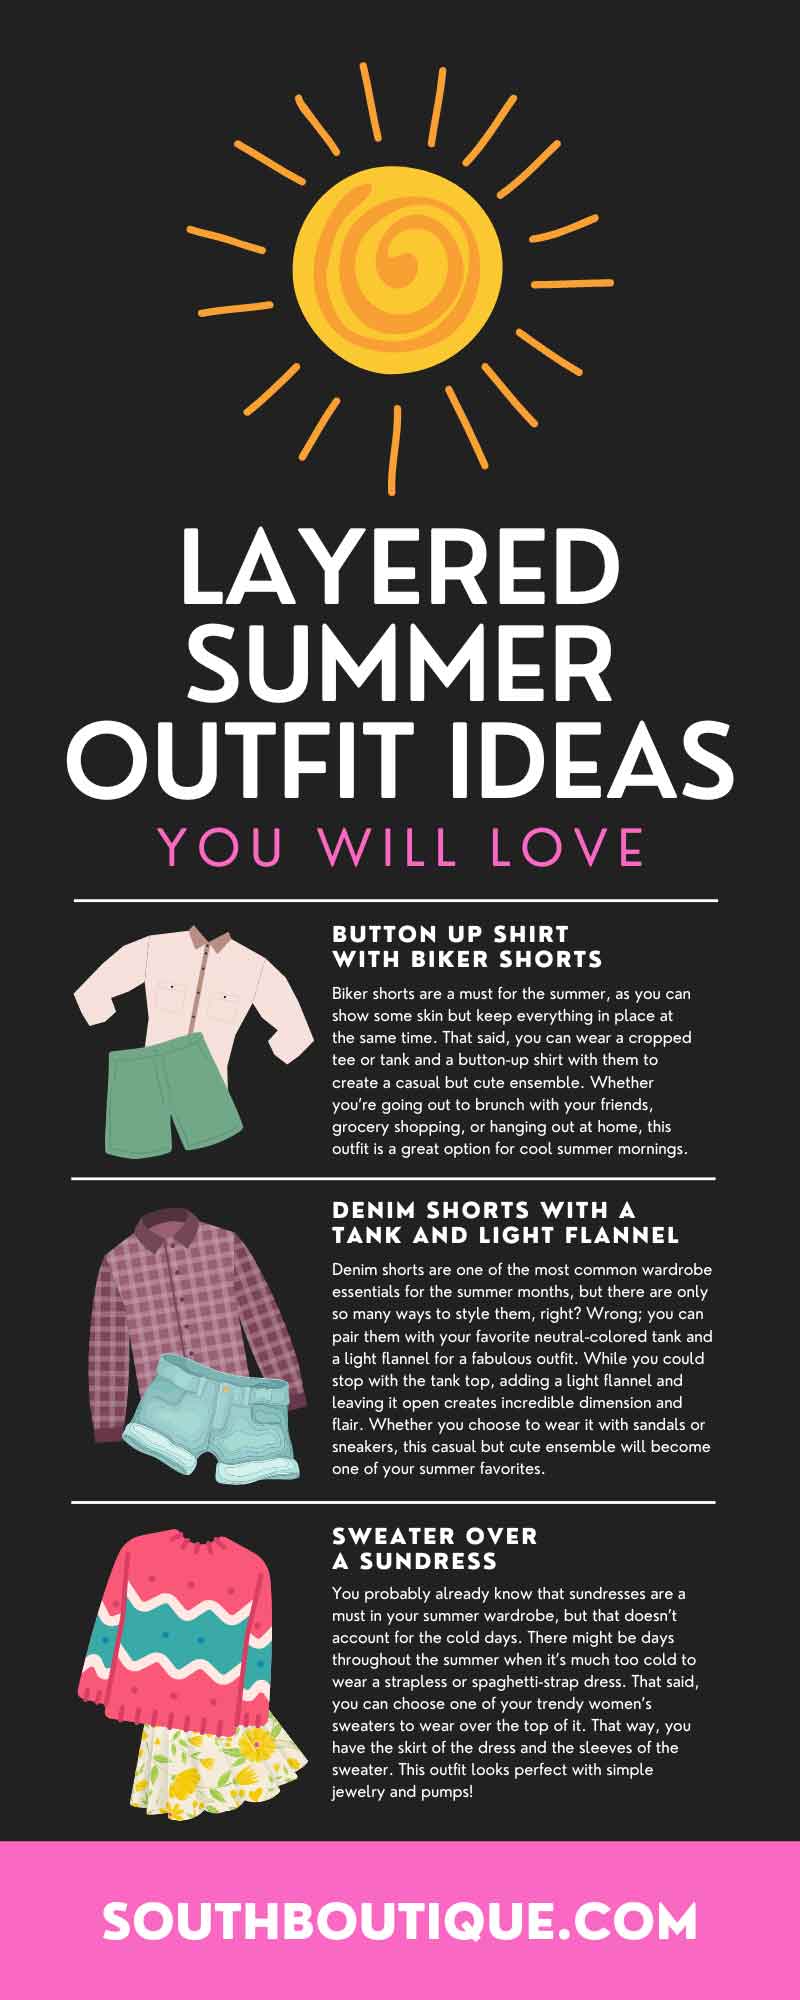 8 Layered Summer Outfit Ideas You Will Love